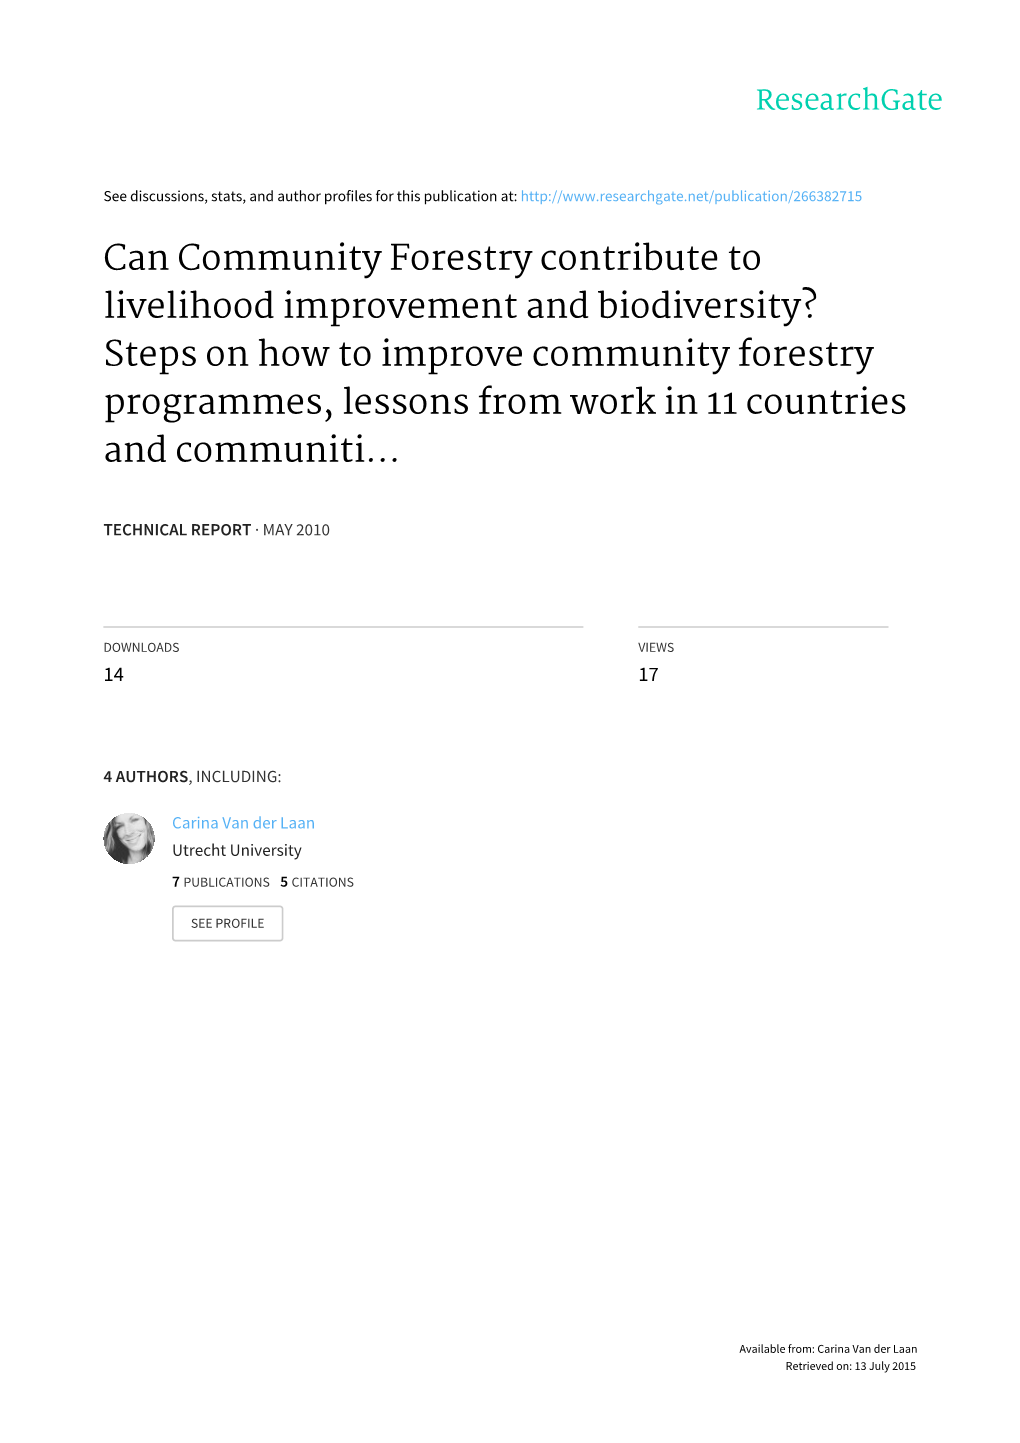 Steps on How to Improve Community Forestry Programmes, Lessons from Work in 11 Countries and Communiti